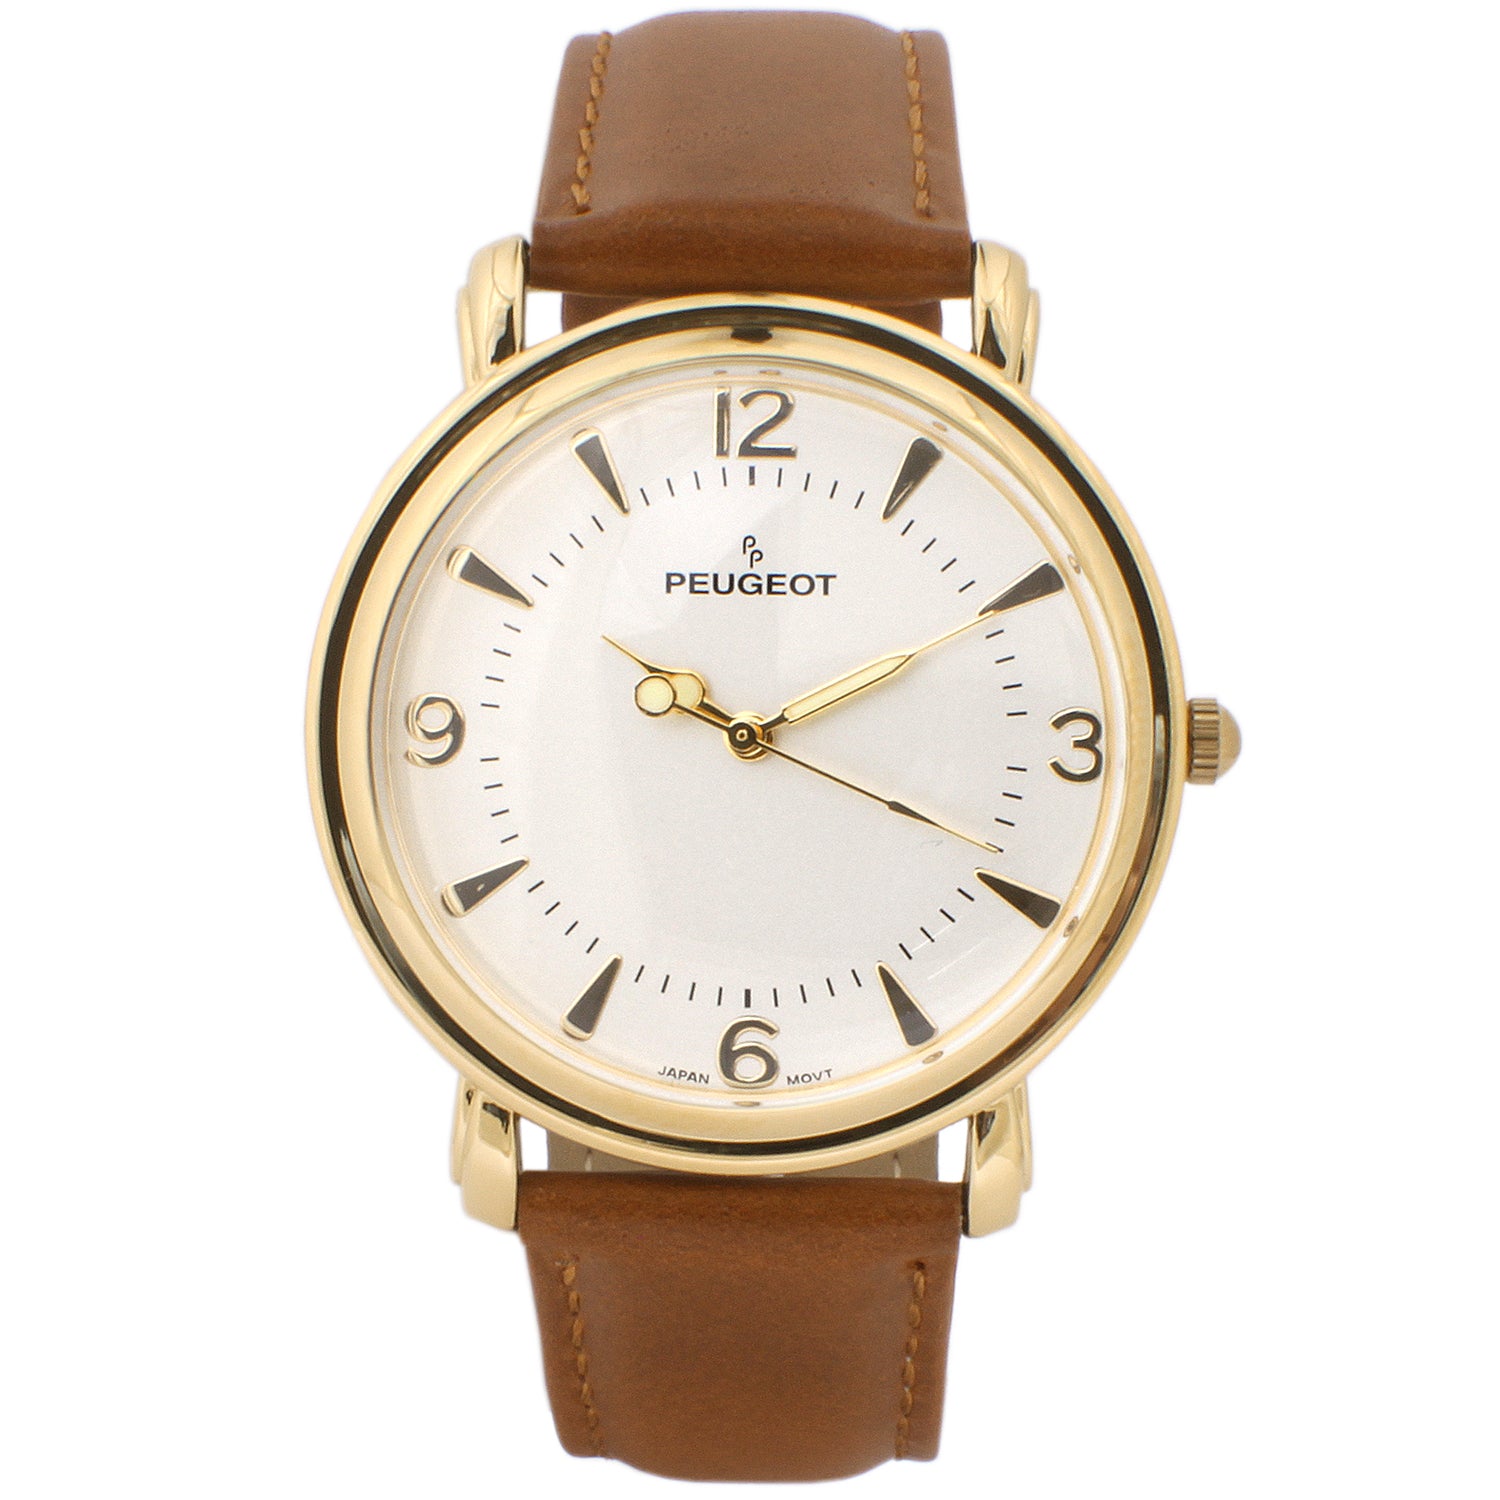 Retro Vintage Watch with Tan Leather Strap -